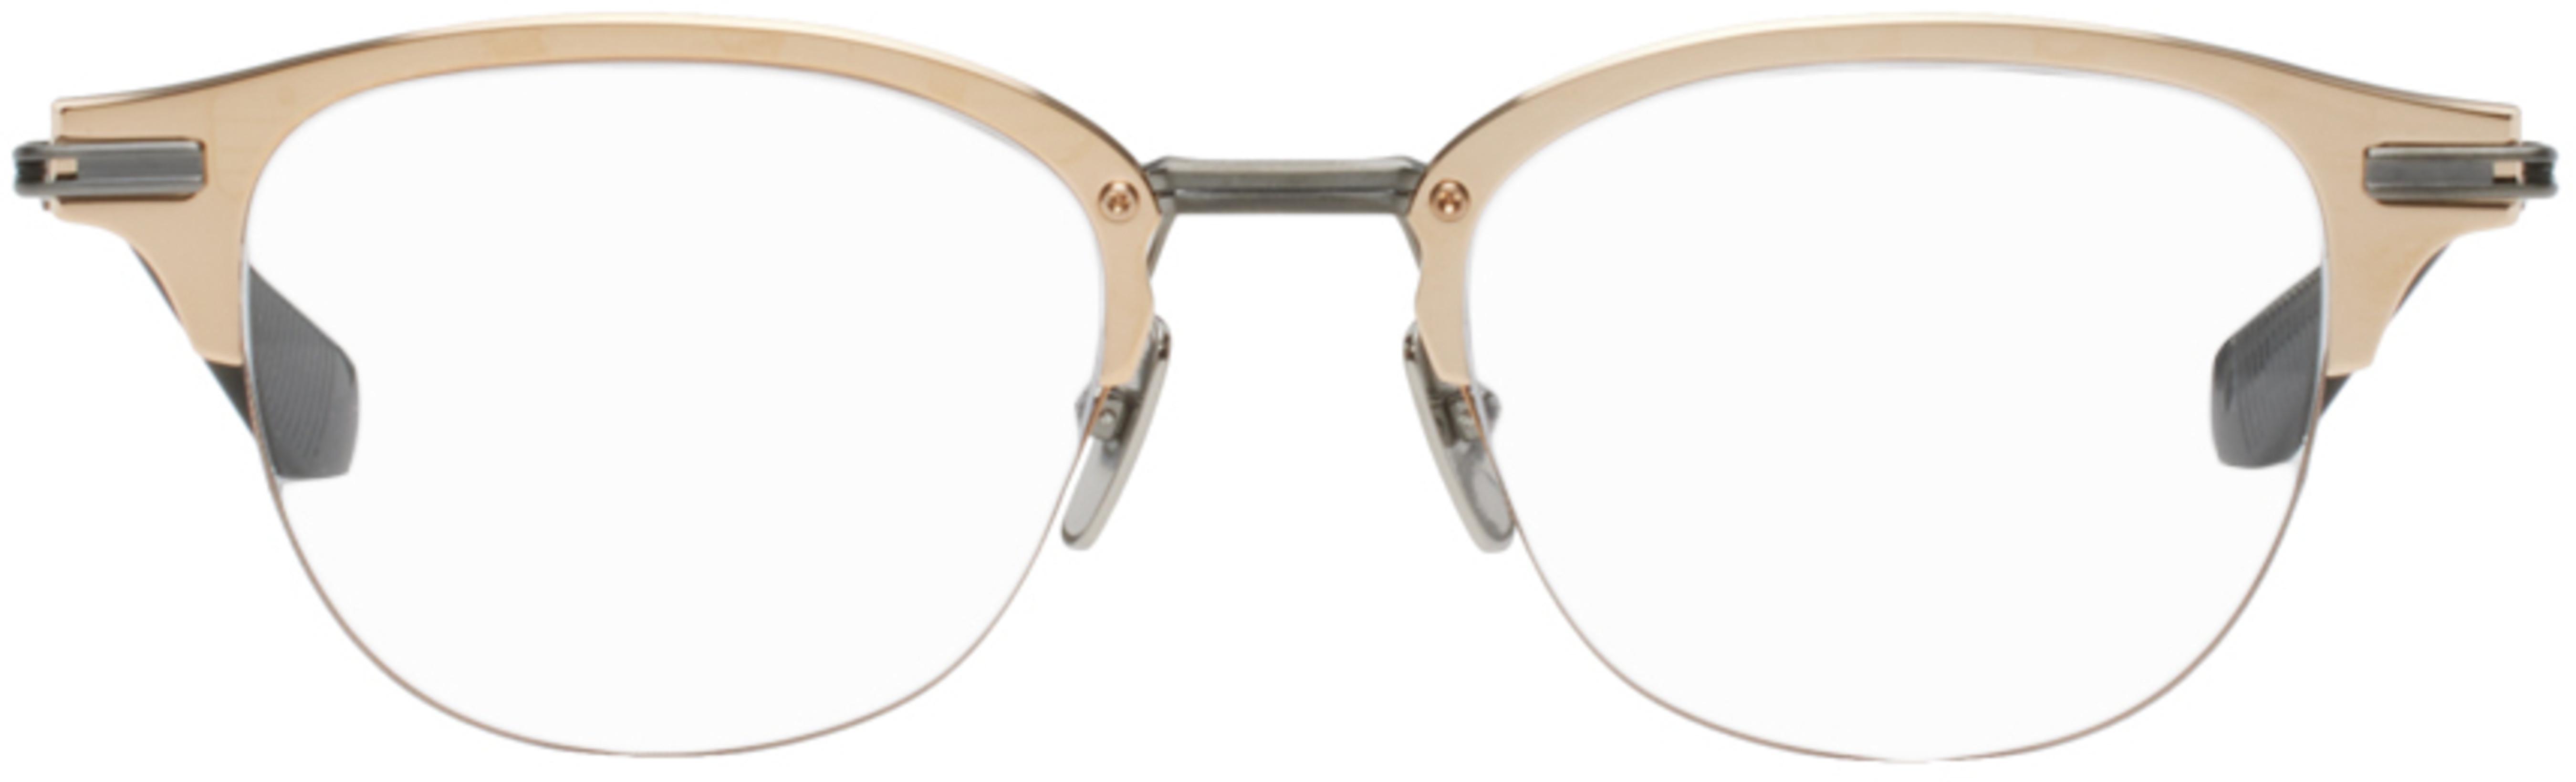 Gold Iambic Glasses by DITA